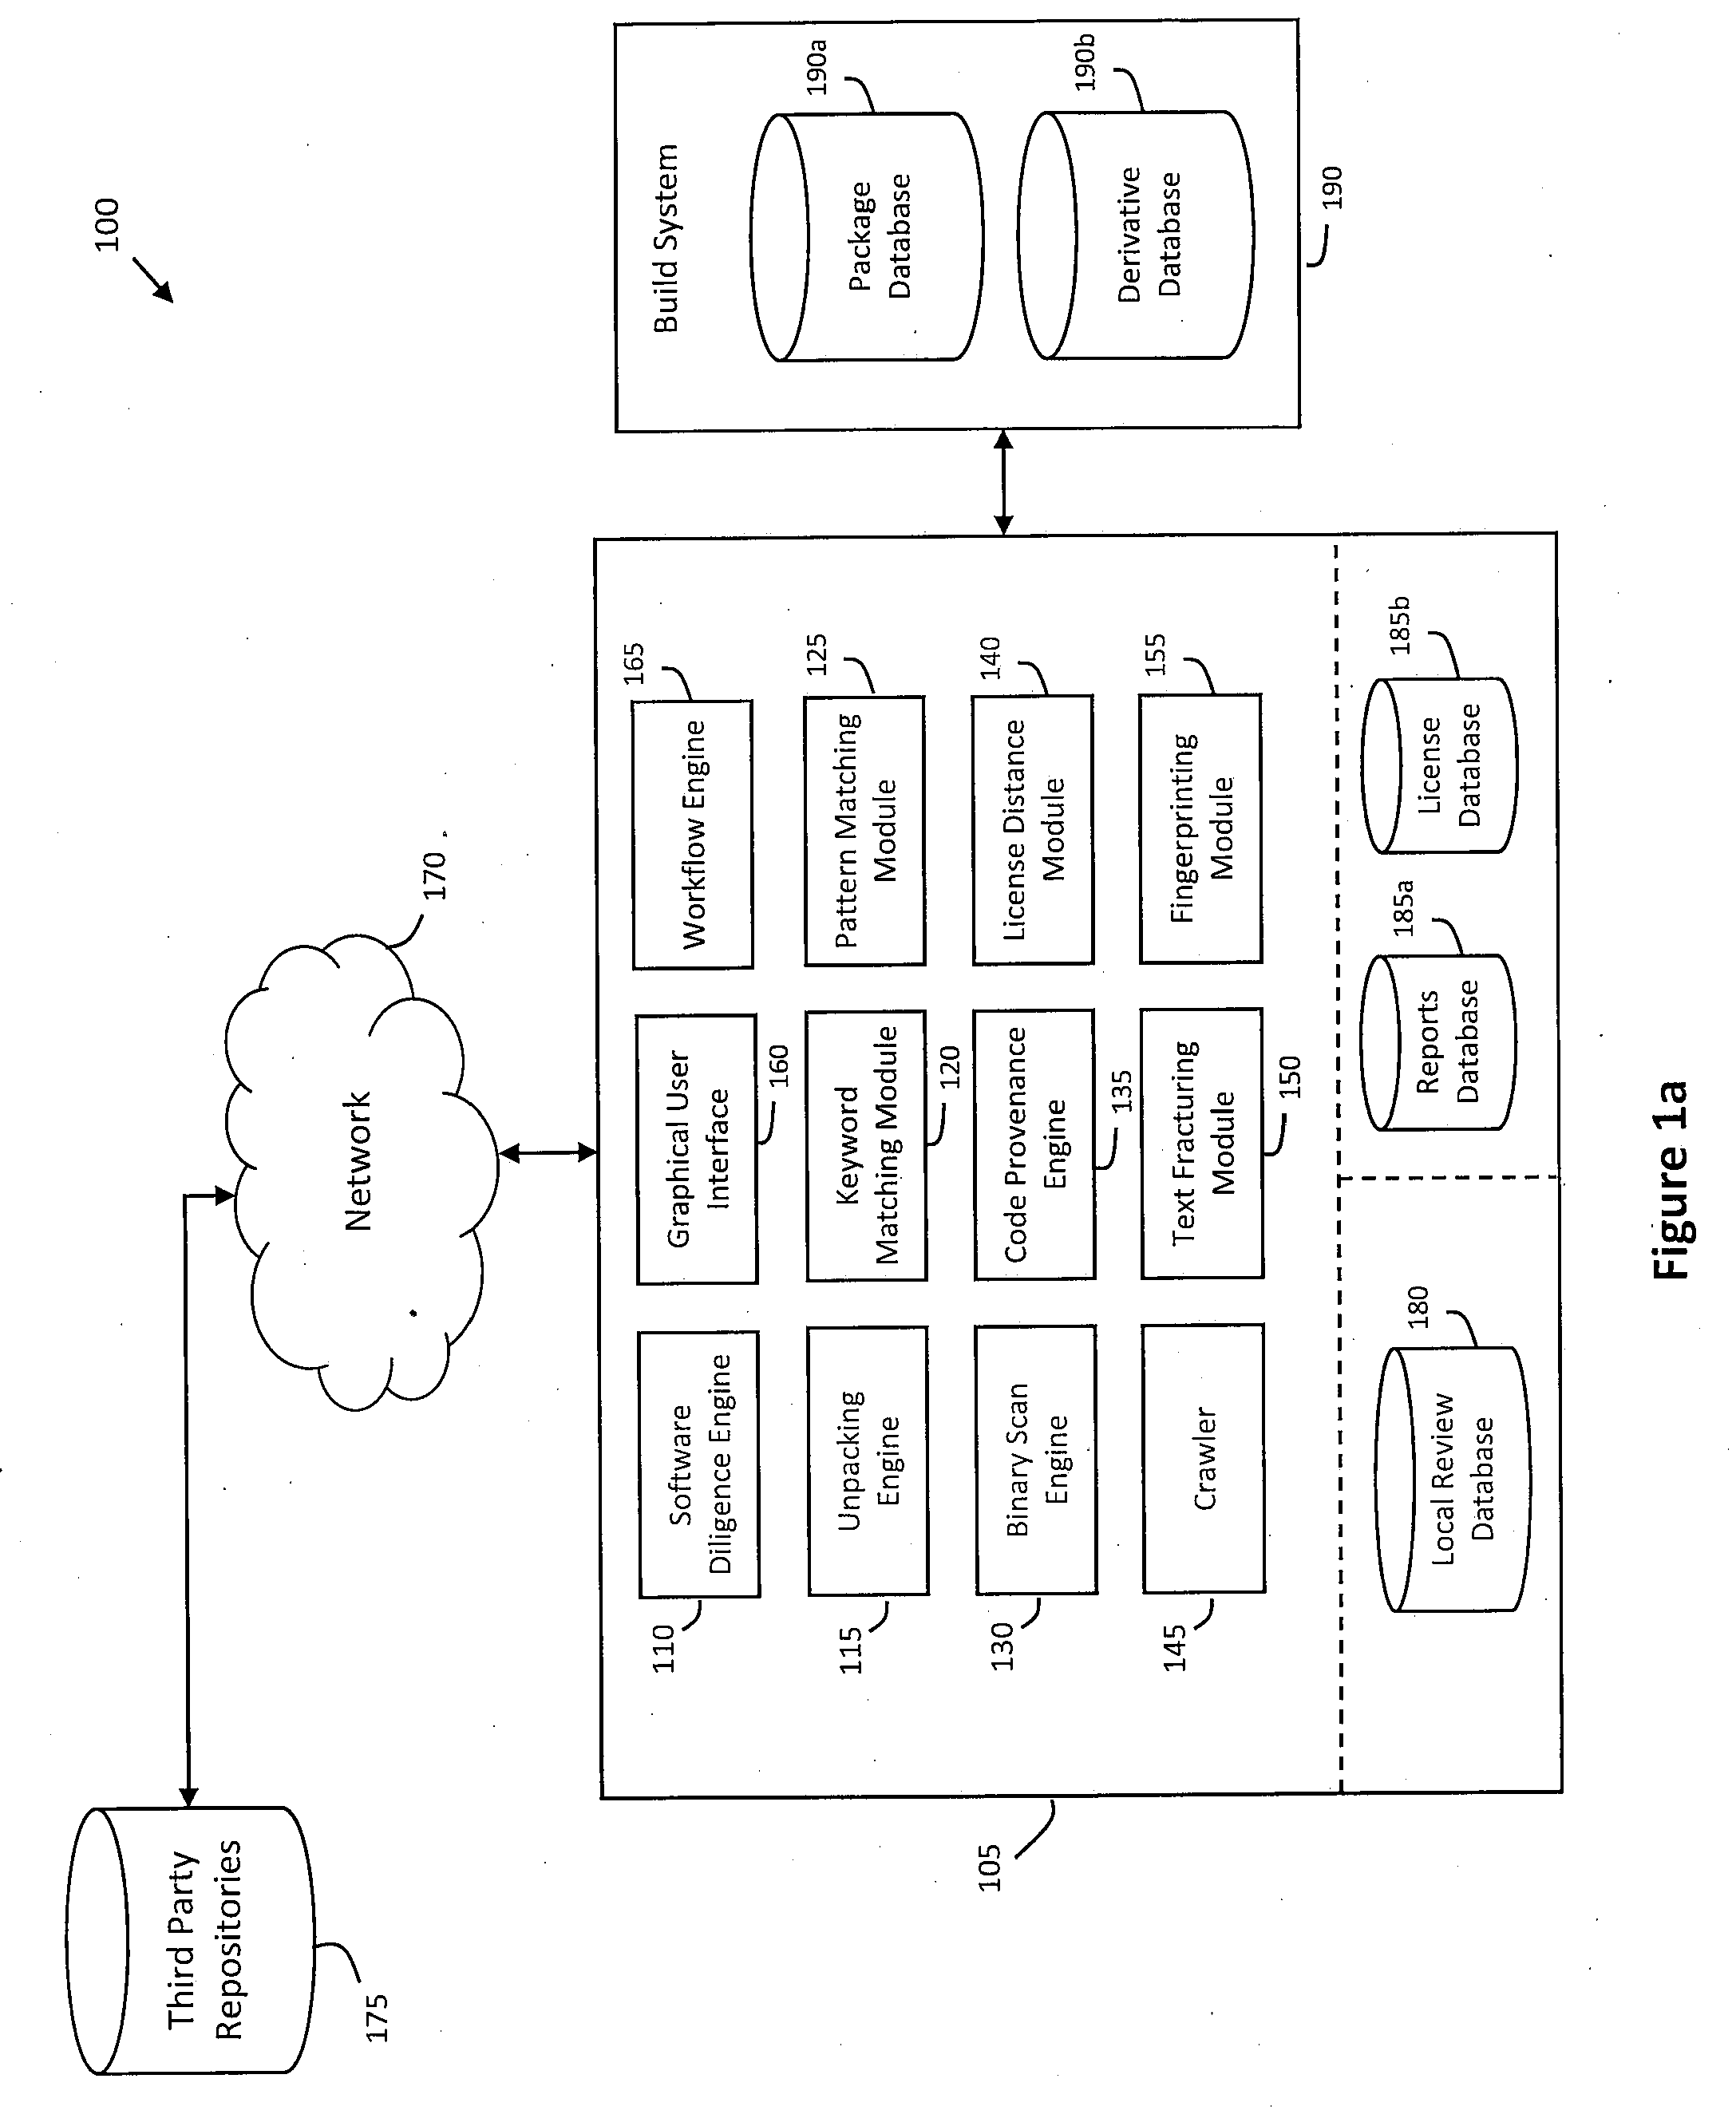 System and method for providing a license description syntax in a software due diligence system